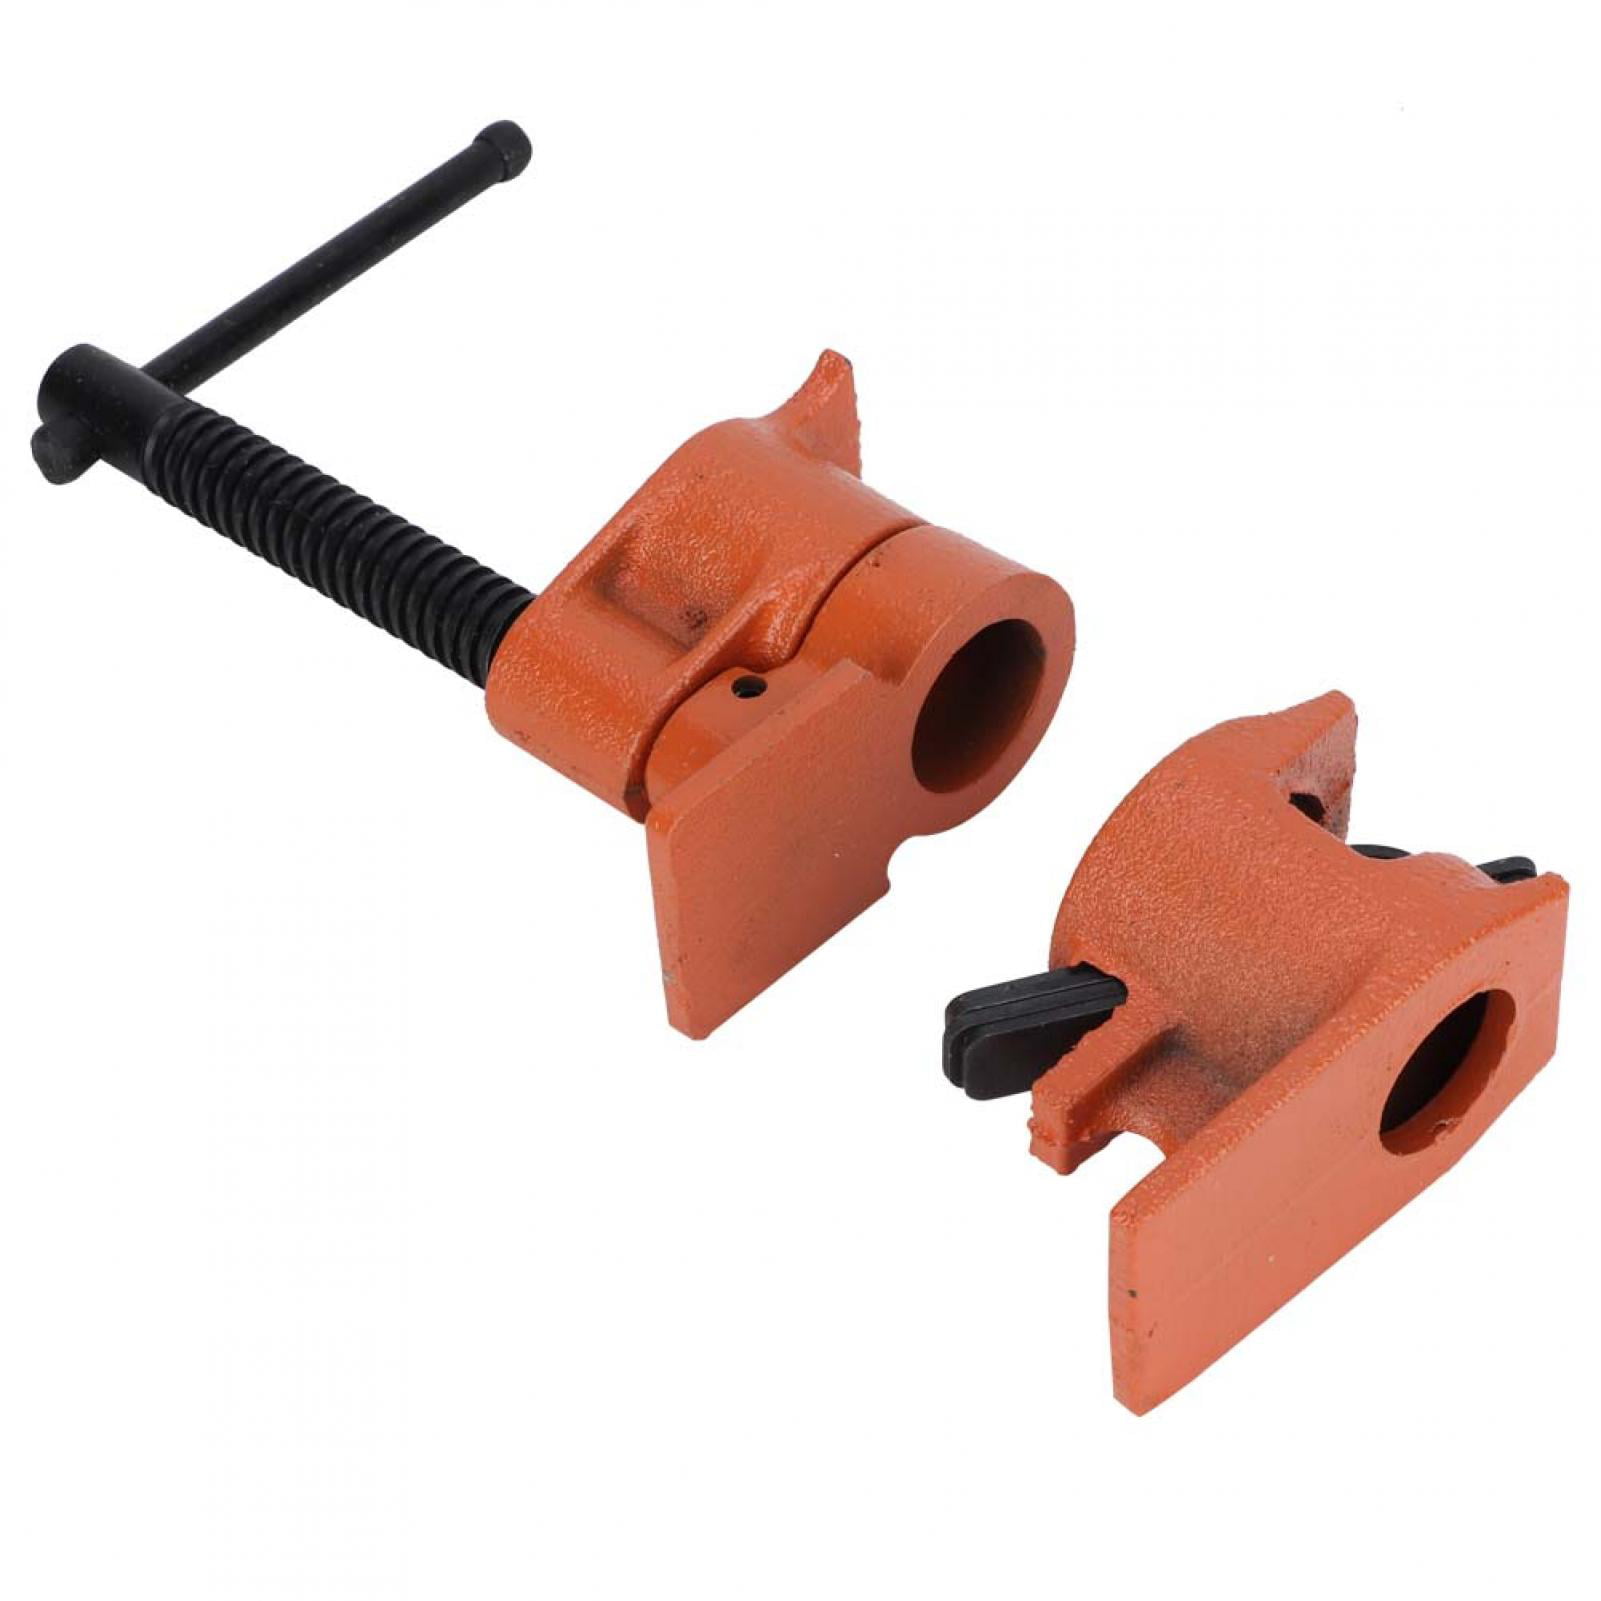 1/2 inch Cast steel Pipe Clamp Jaws Vise Fixture Set Woodworking Tool Kit 